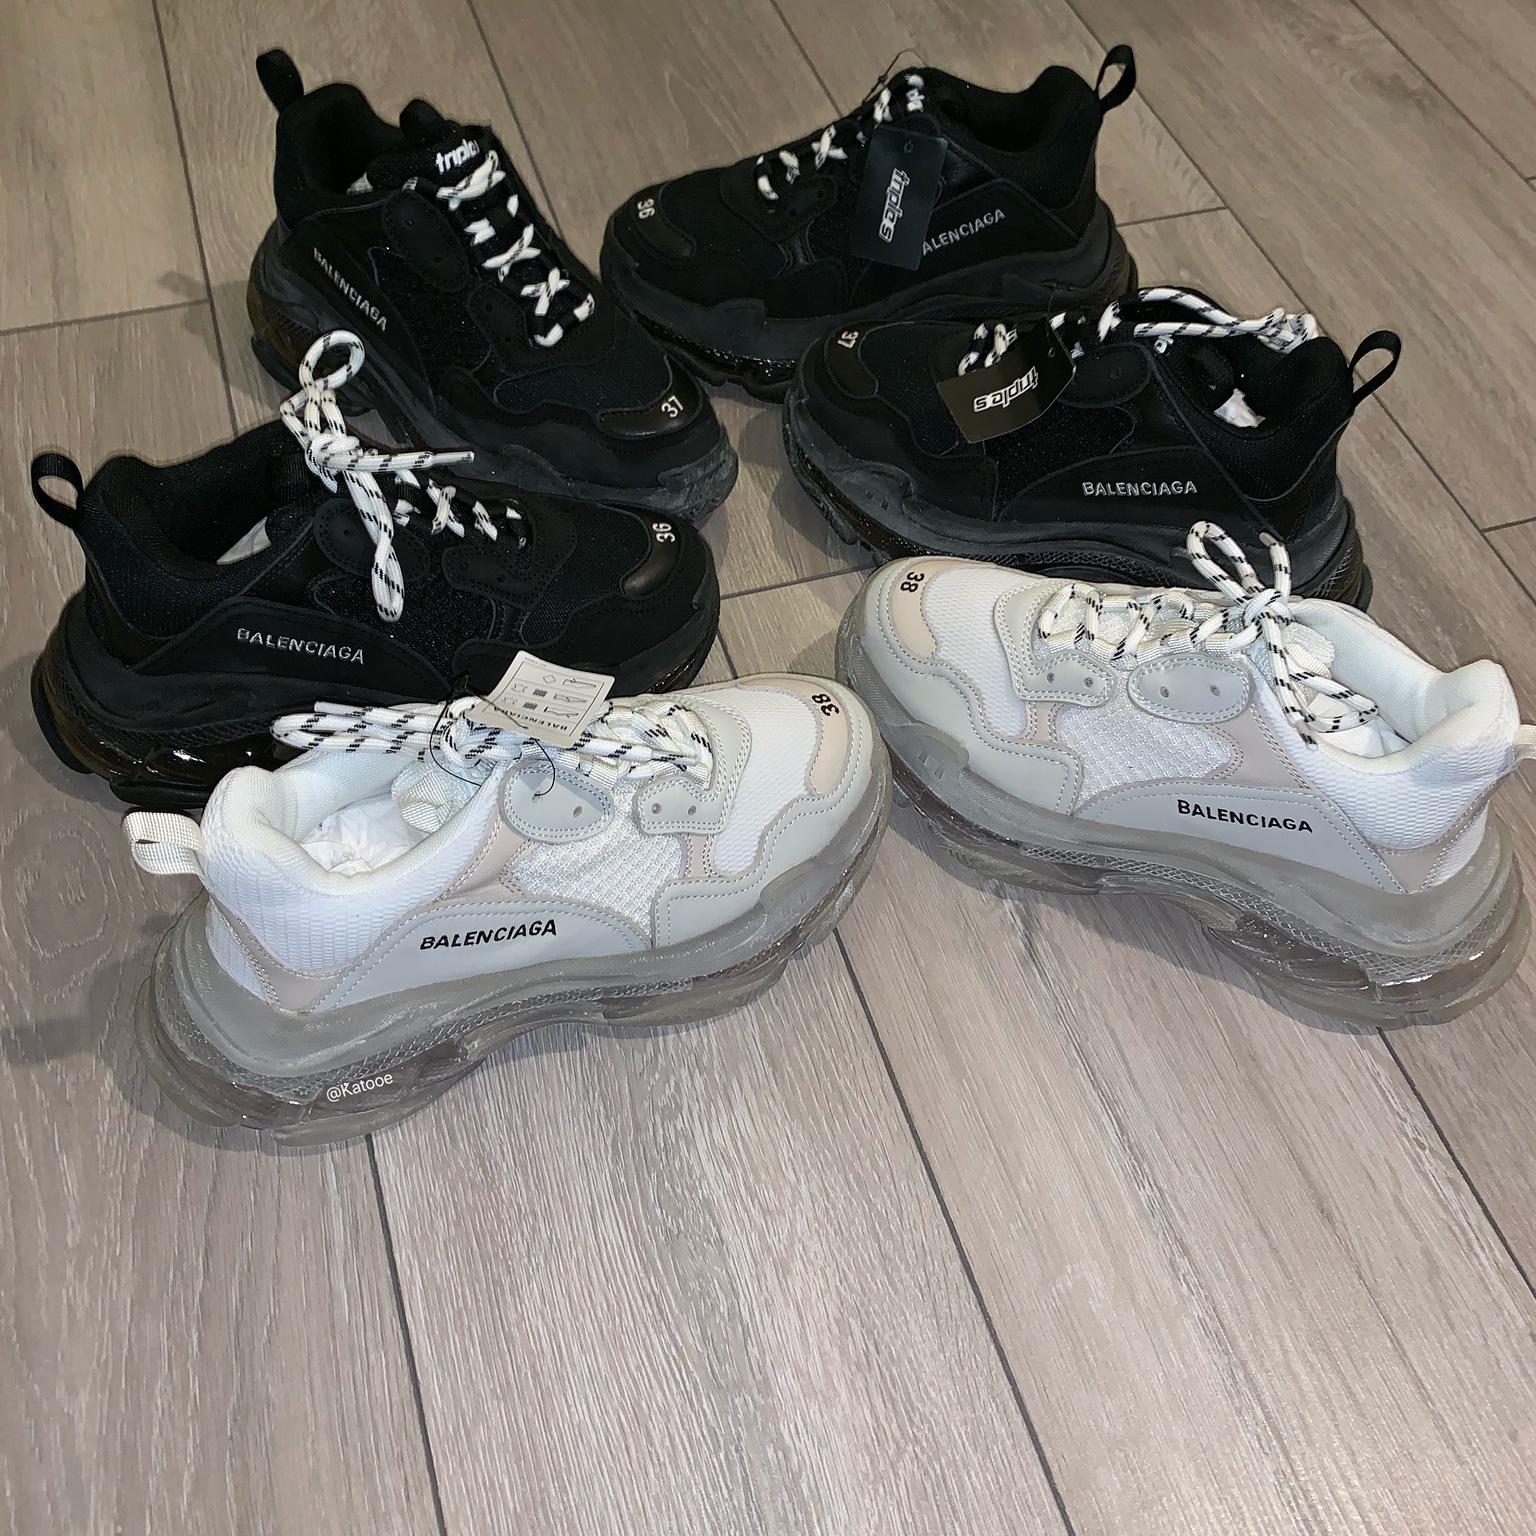 For sale new Balenciaga Triple S Trainers Jaune Fluo Yeezy